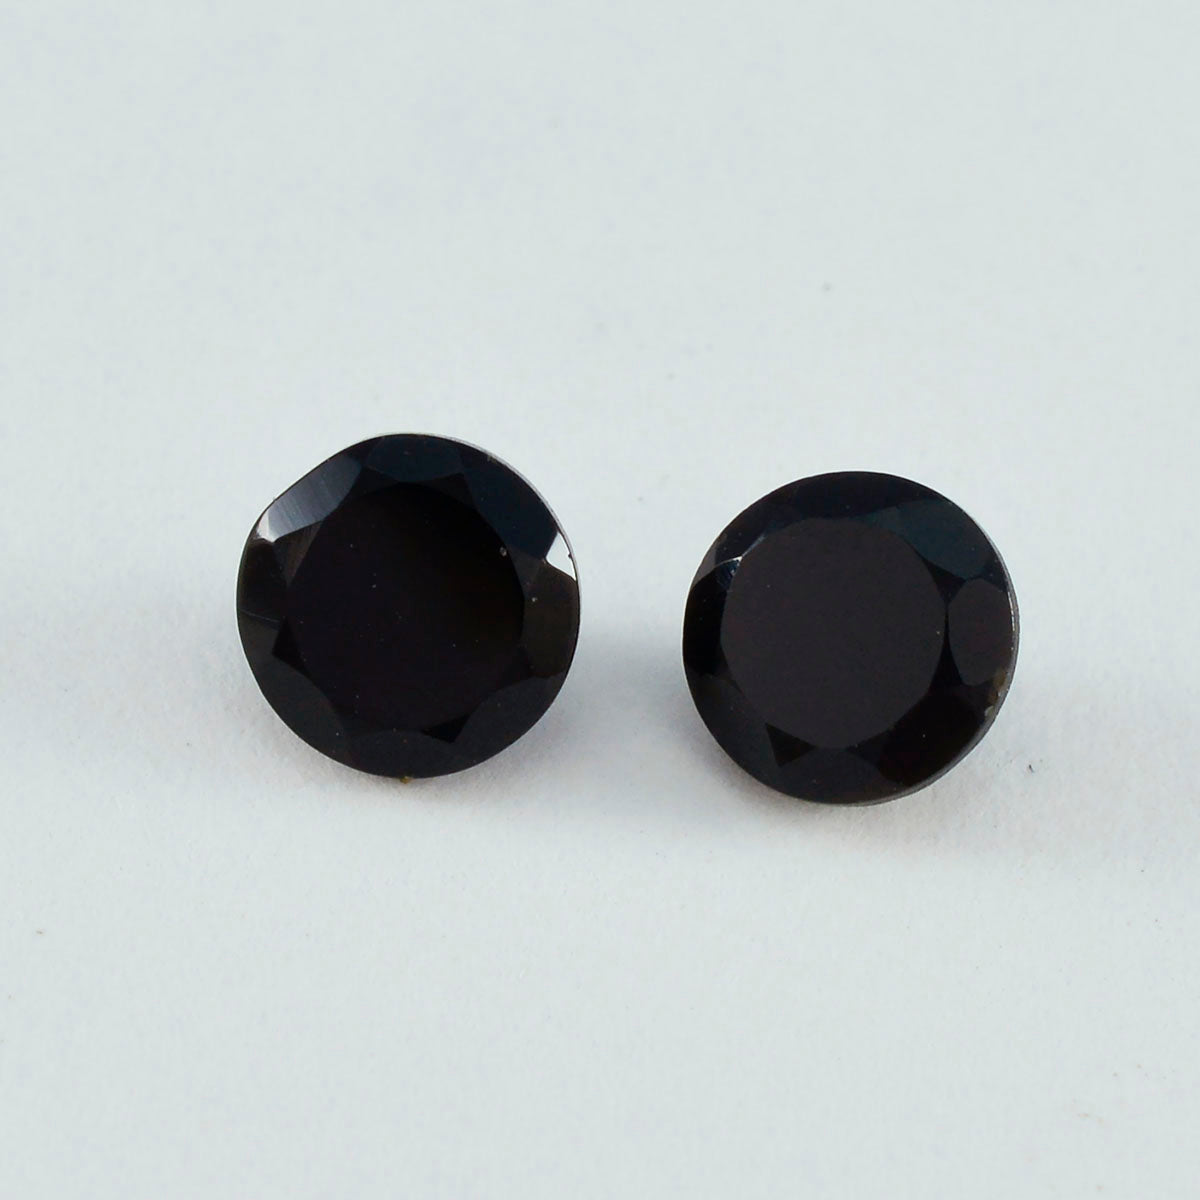 Riyogems 1PC Natural Black Onyx Faceted 10x10 mm Round Shape excellent Quality Loose Gems